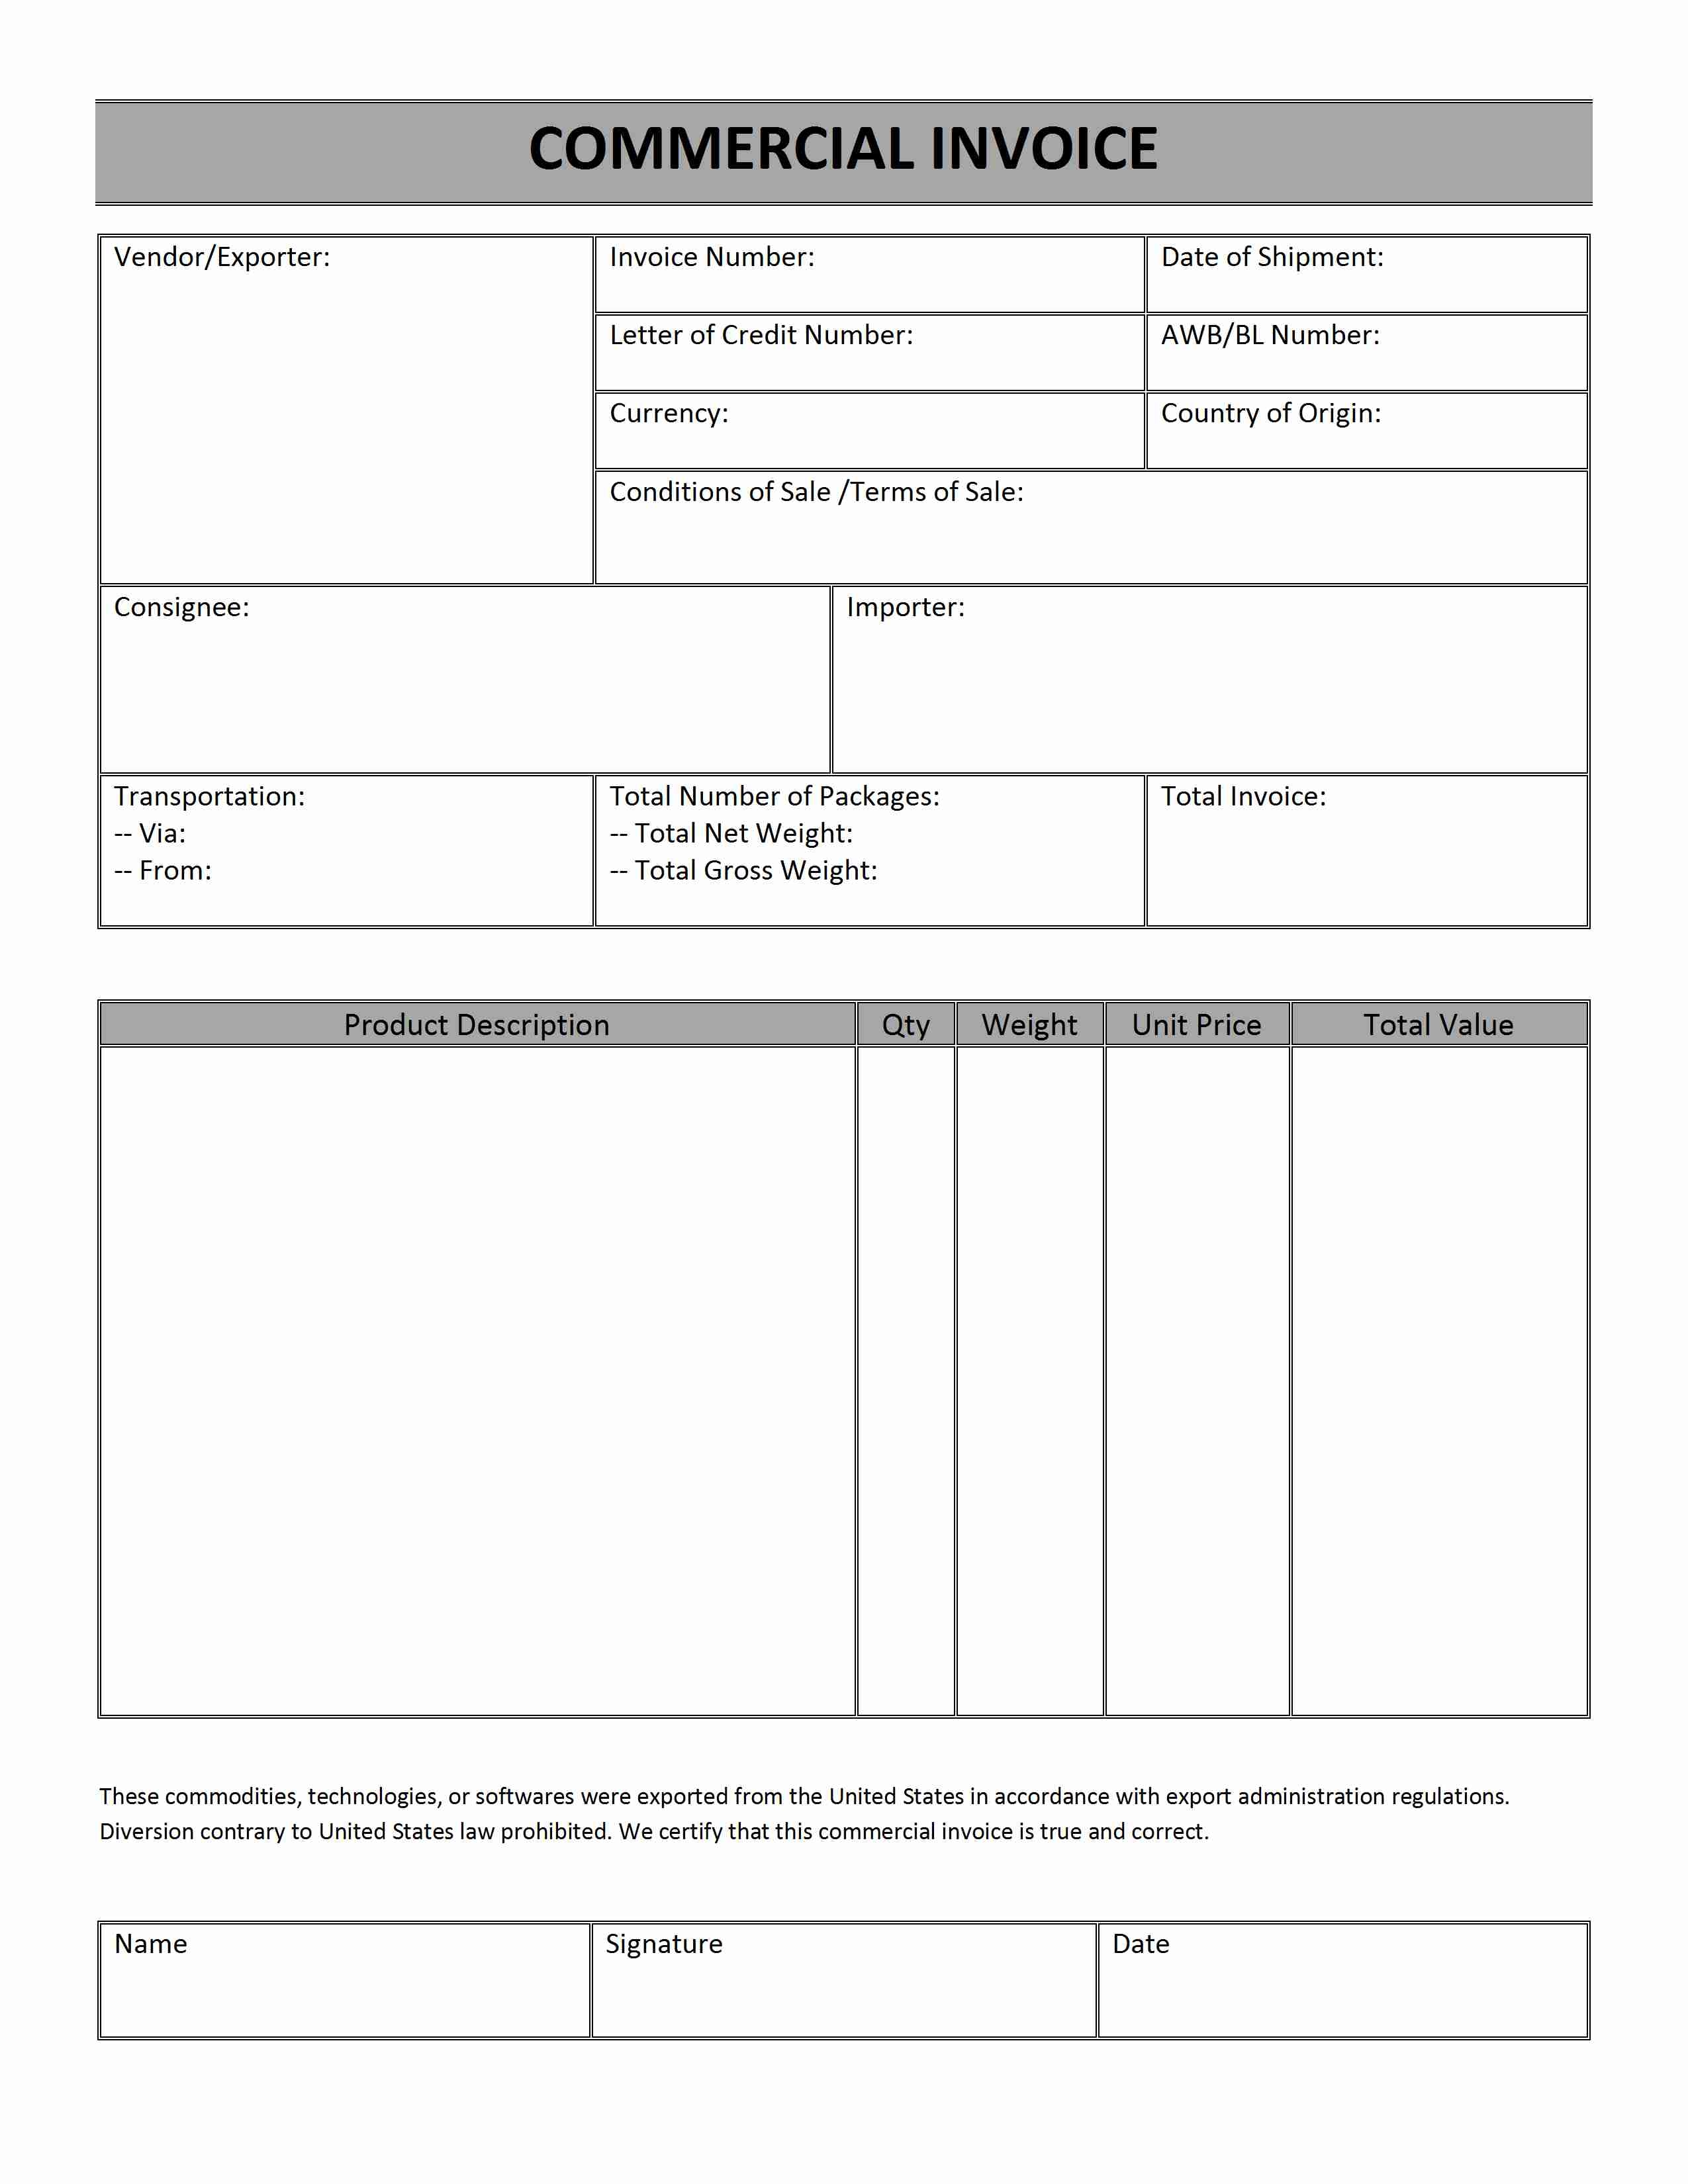 commercial invoice example commercial invoice freewordtemplates 2550 X 3300